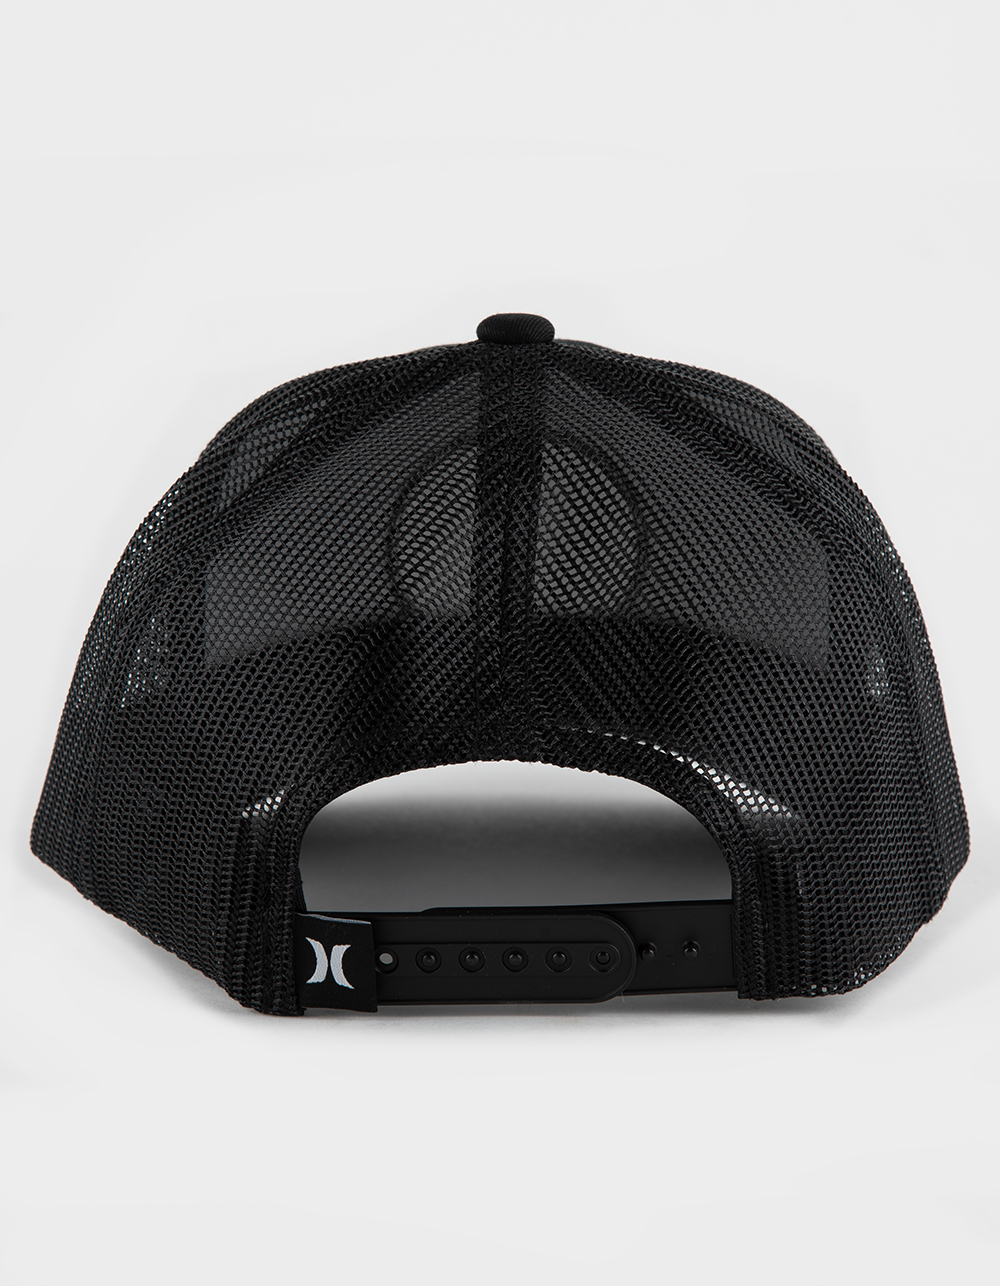 Hurley Local Trucker Hat - Black/White - One Size